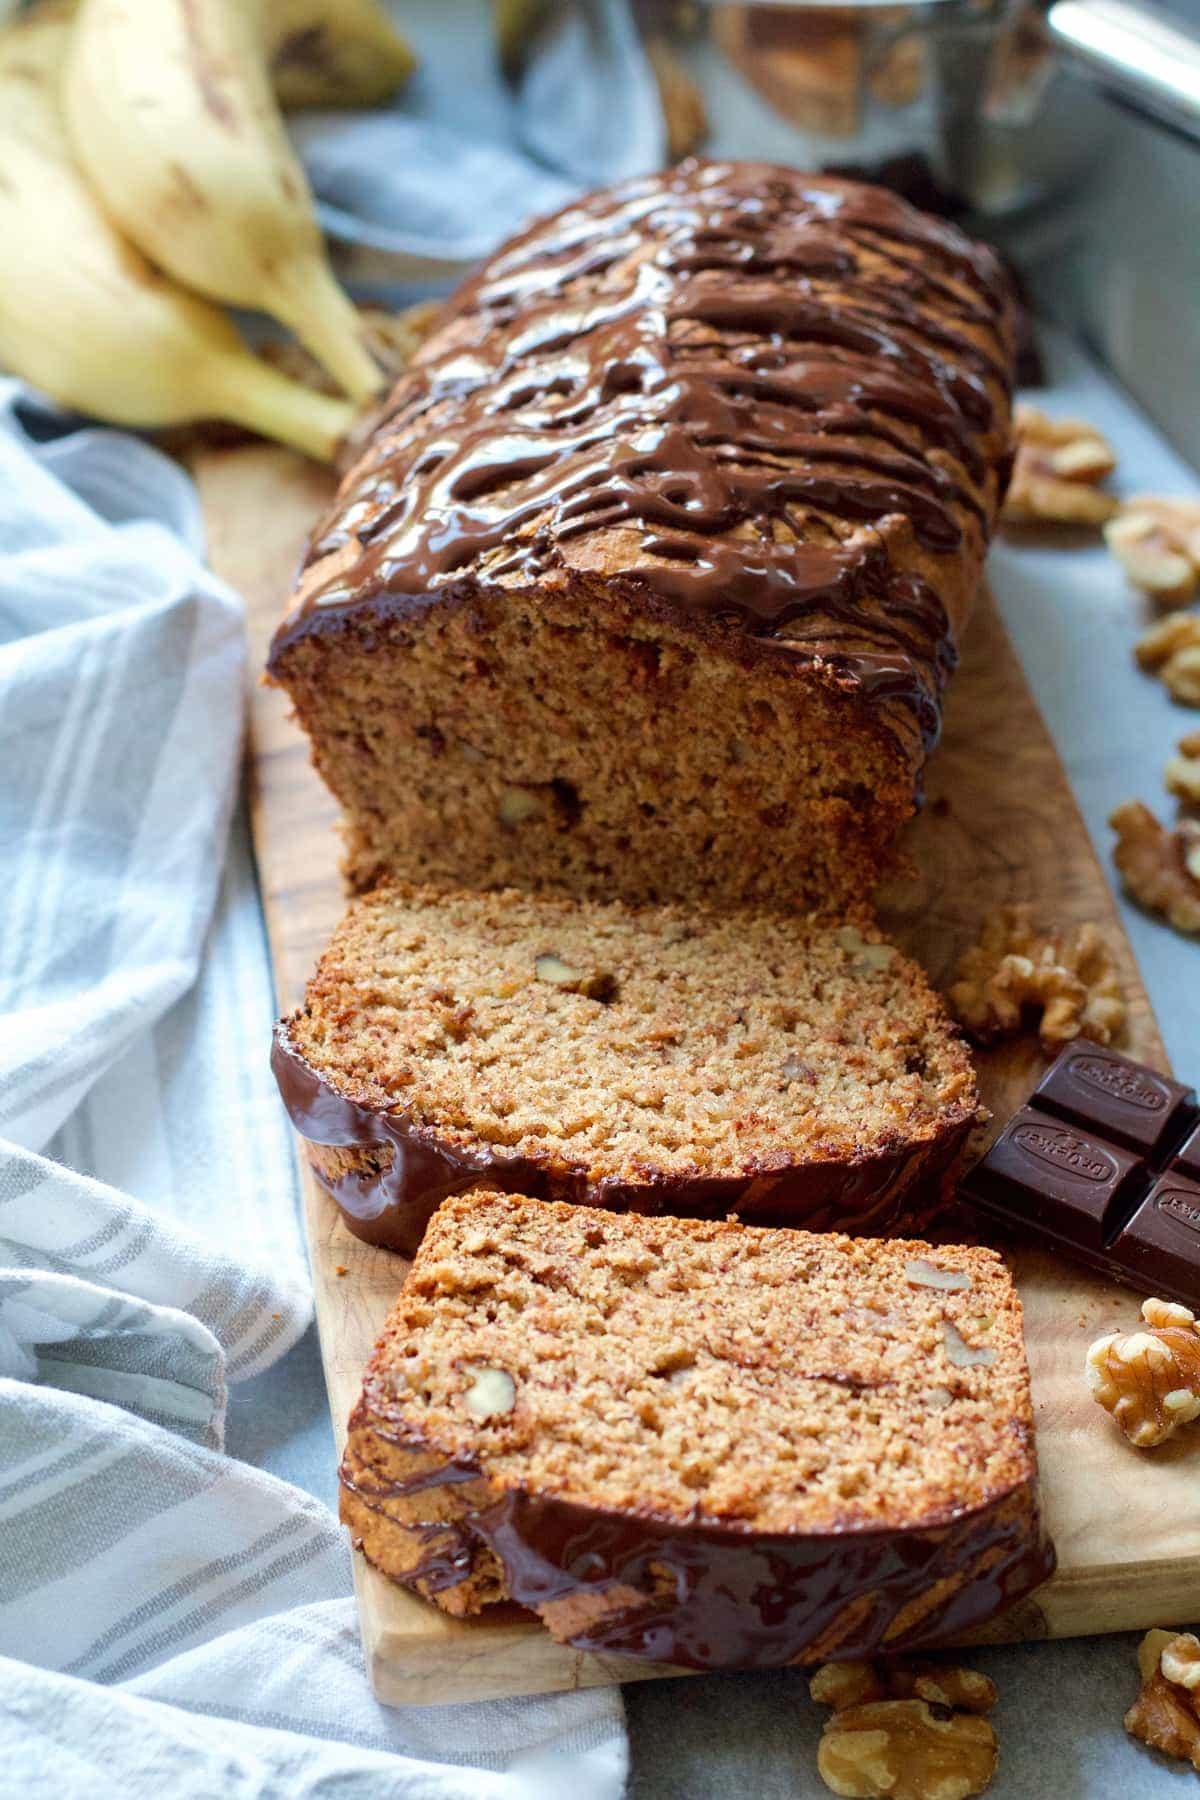 Banana bread with two slices cut off.